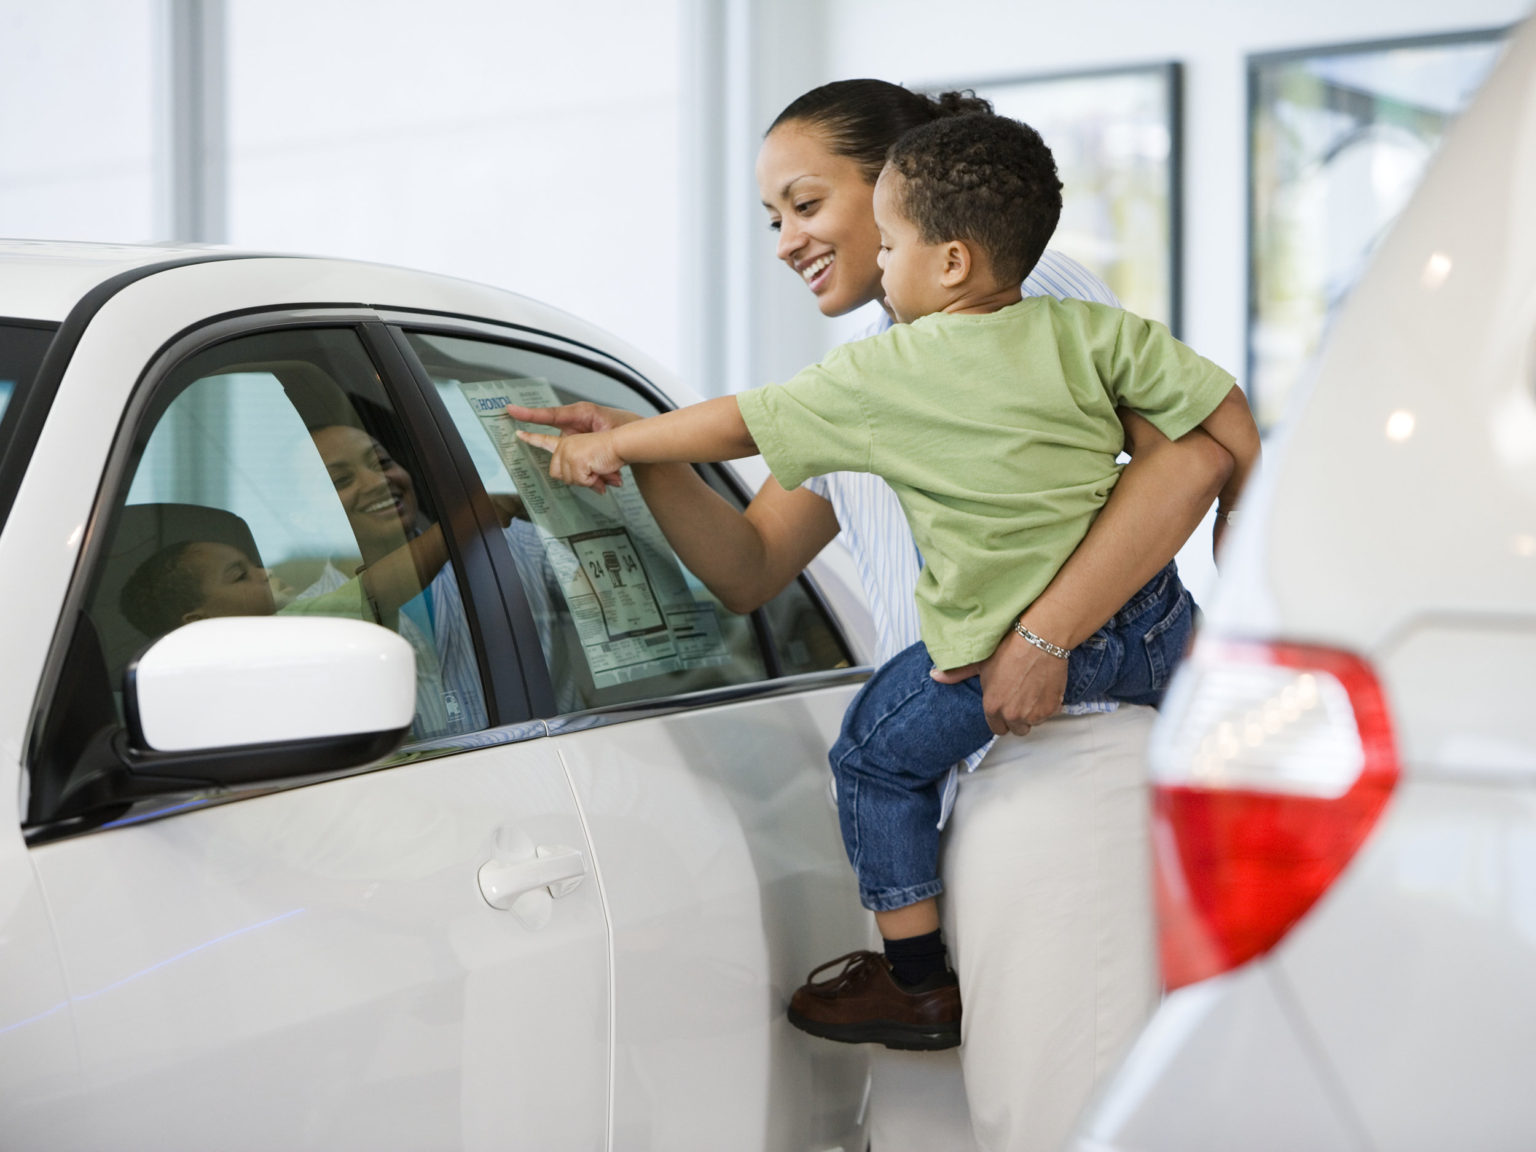 Survey respondents named a number of influences on their vehicle purchasing habits.